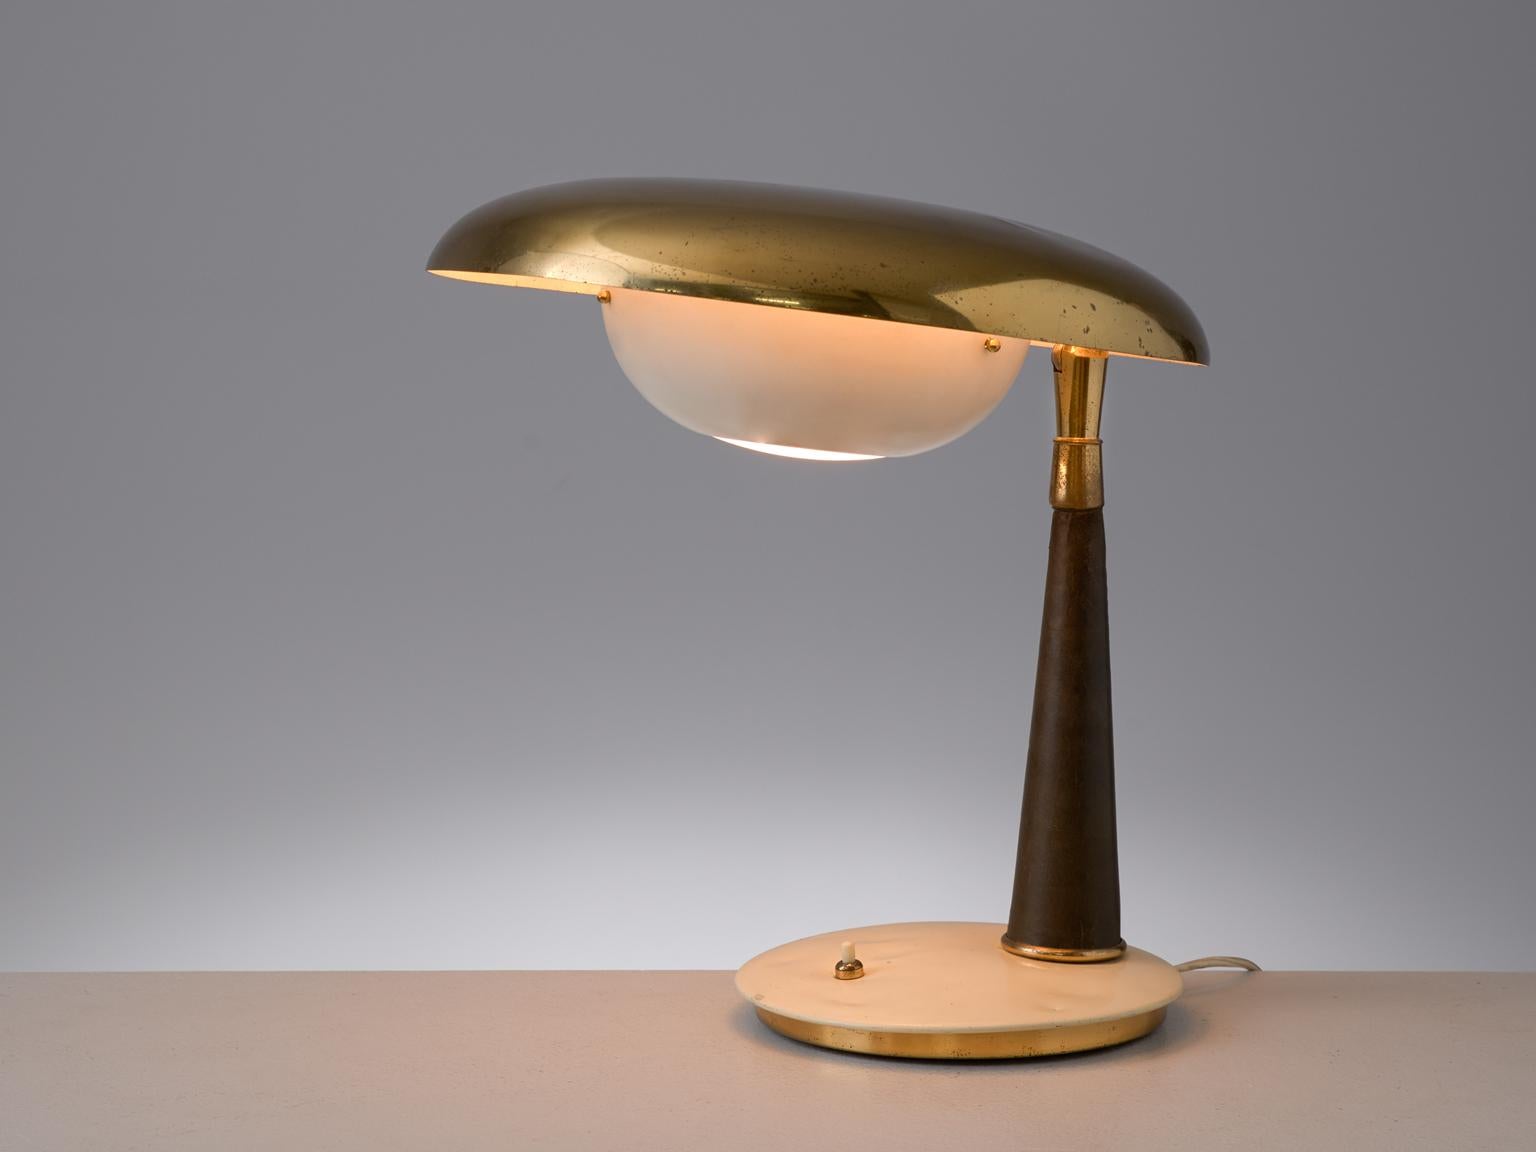 Angelo Lelii for Arredoluce, table lamp, in brass, metal and leather, by Italy, 1950s. 

Stylish desk light with admirable patinated brass shade, designed by Italian designer Angelo Lelli. The disc-shaped shade has an opposite shade as diffuser. The